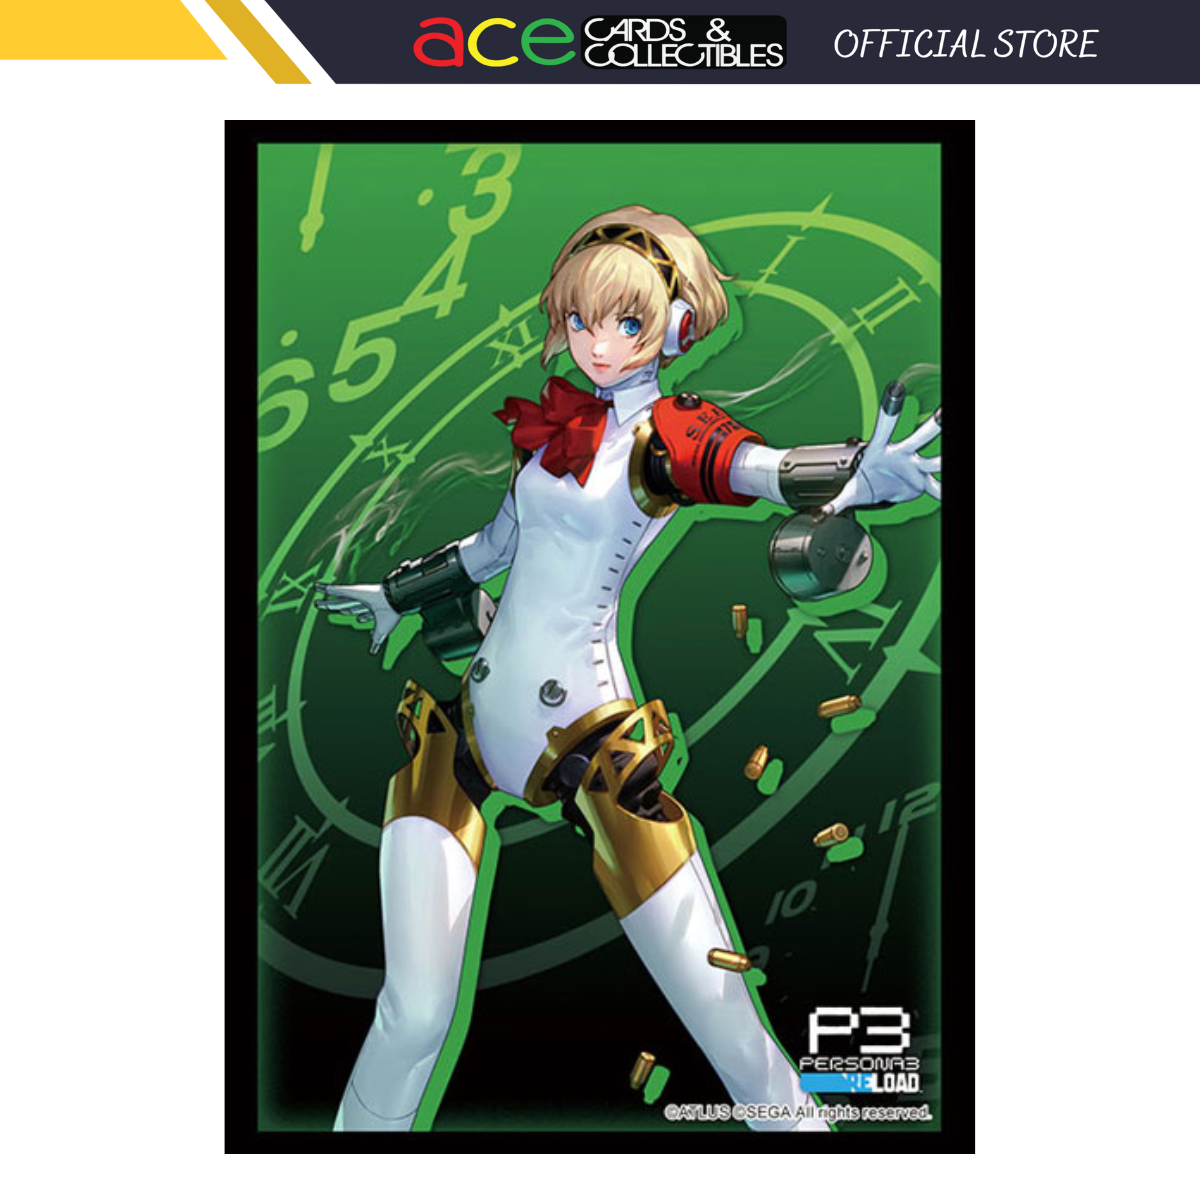 Bushiroad Sleeves Collection -Persona 3 Reload- "Aegis" (Vol.4193)-Bushiroad-Ace Cards & Collectibles